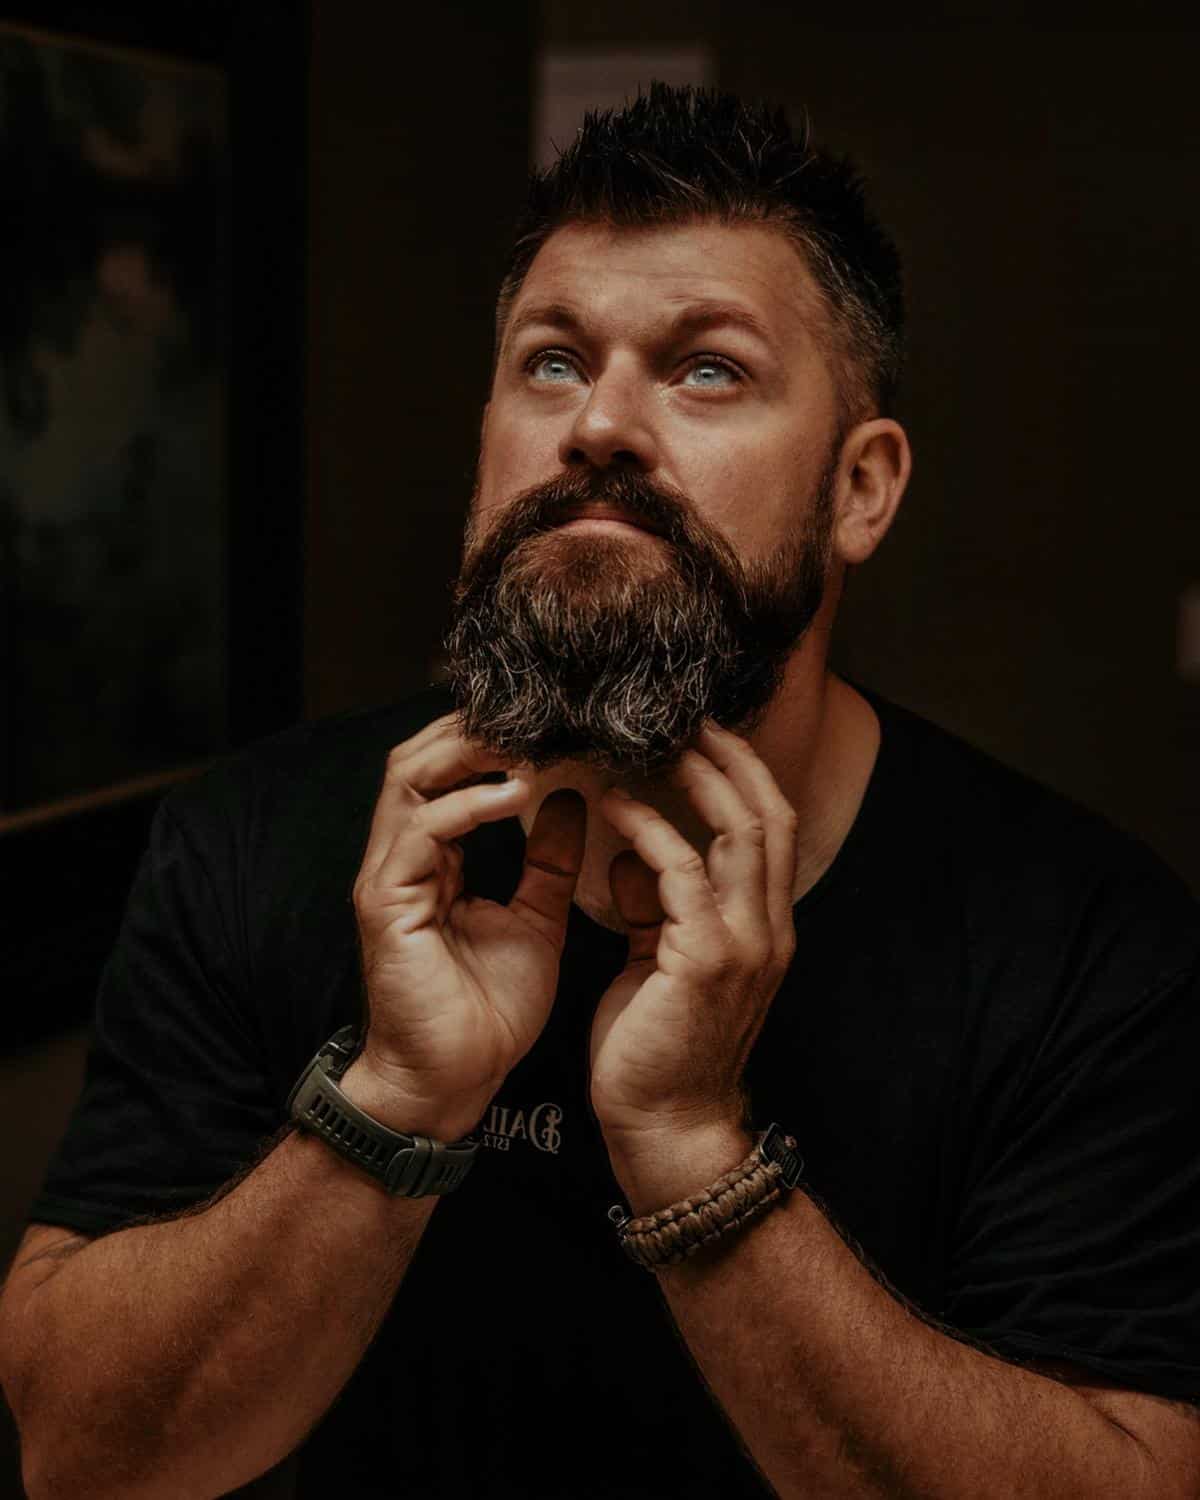 A man with a well-groomed beard, showcasing the importance of skin care in beard growth.